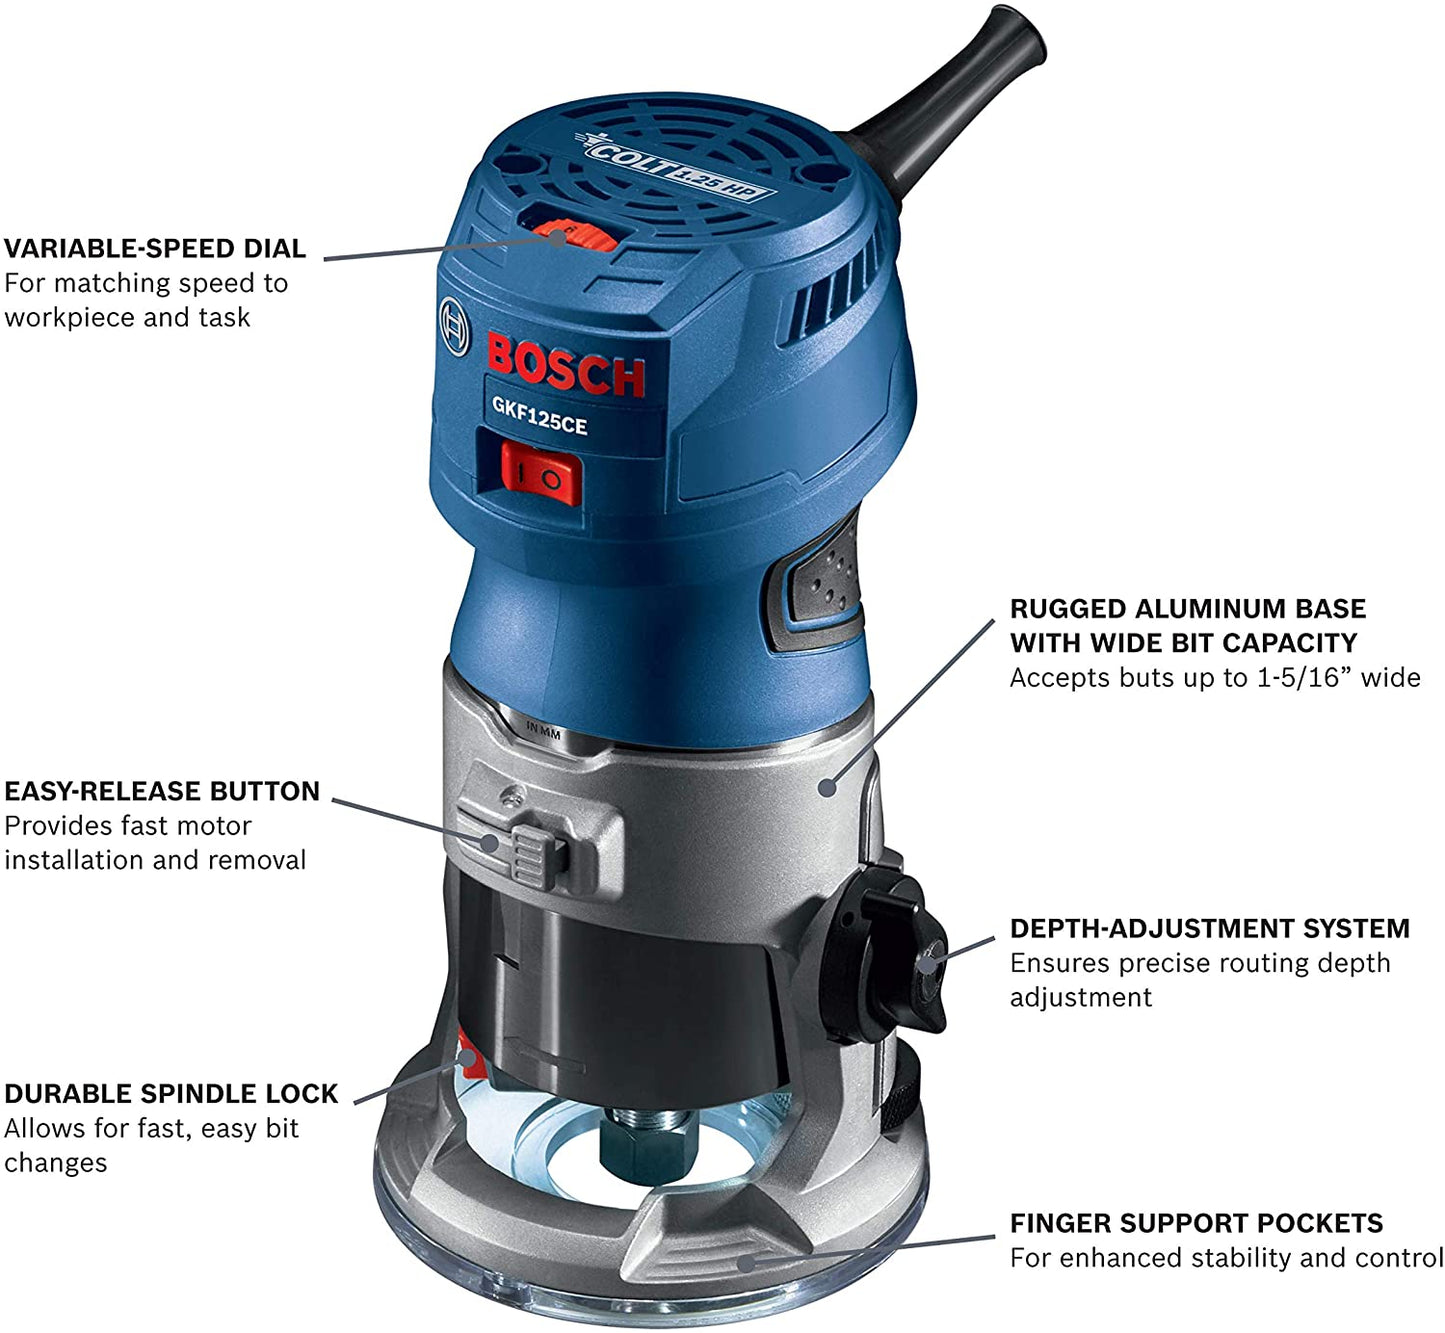 Bosch - Colt 1.25 HP (Max) Variable-Speed Palm Router Tool - Model: GFK125CEN